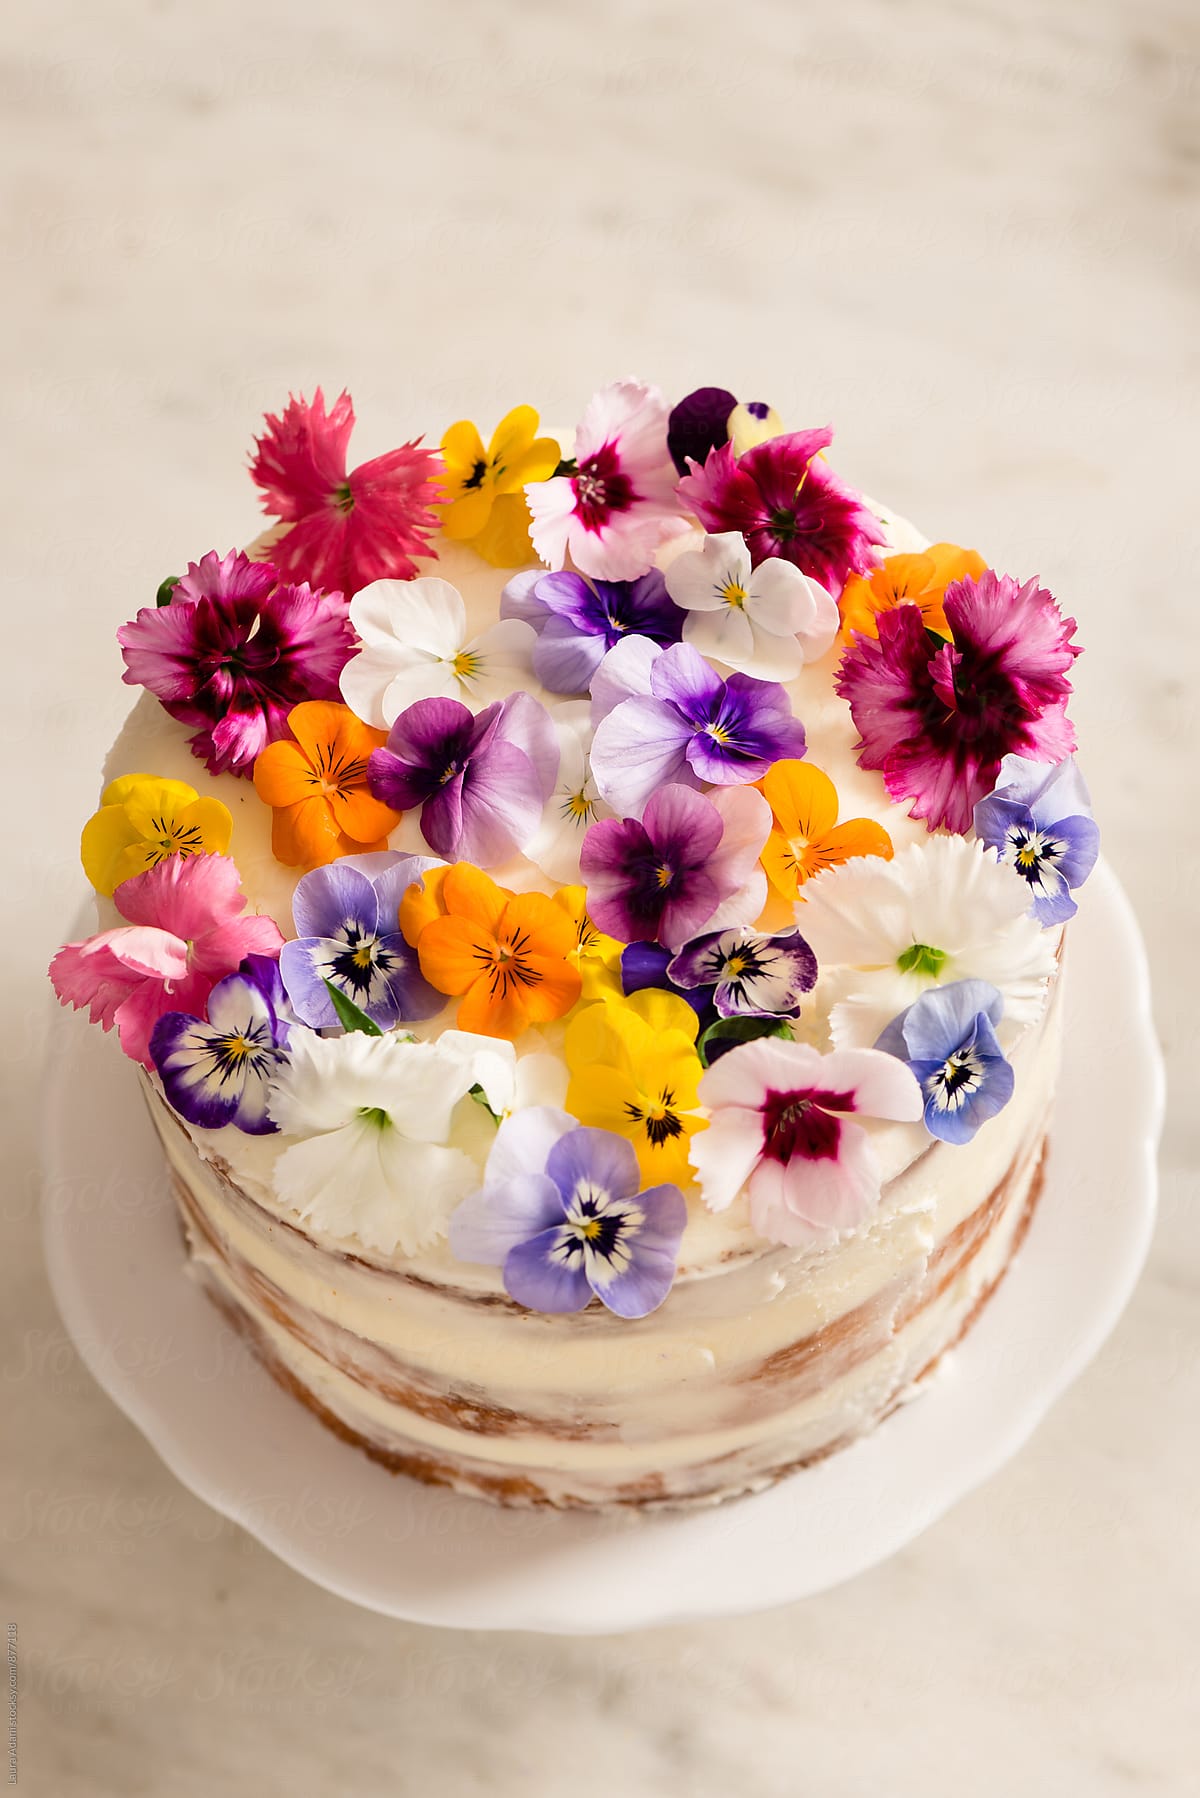 Naked Cake With Edible Flowers\